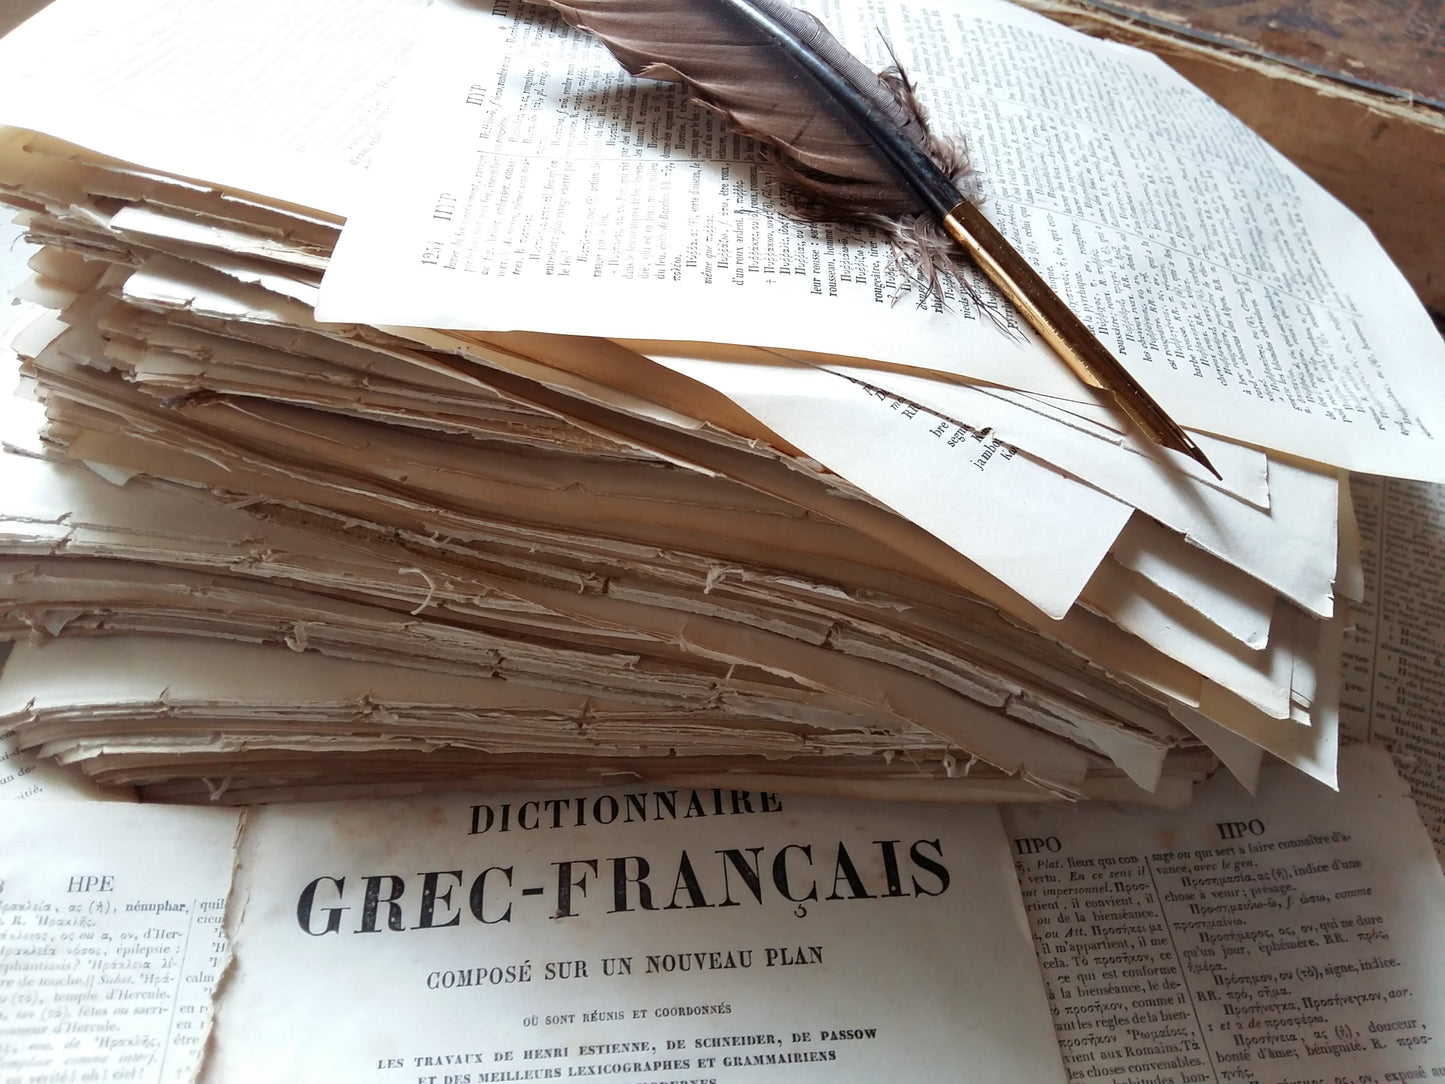 100 Antique Greek - French Dictionary Book Pages, Dating from 1863. from Tiggy & Pip - €35.00! Shop now at Tiggy and Pip